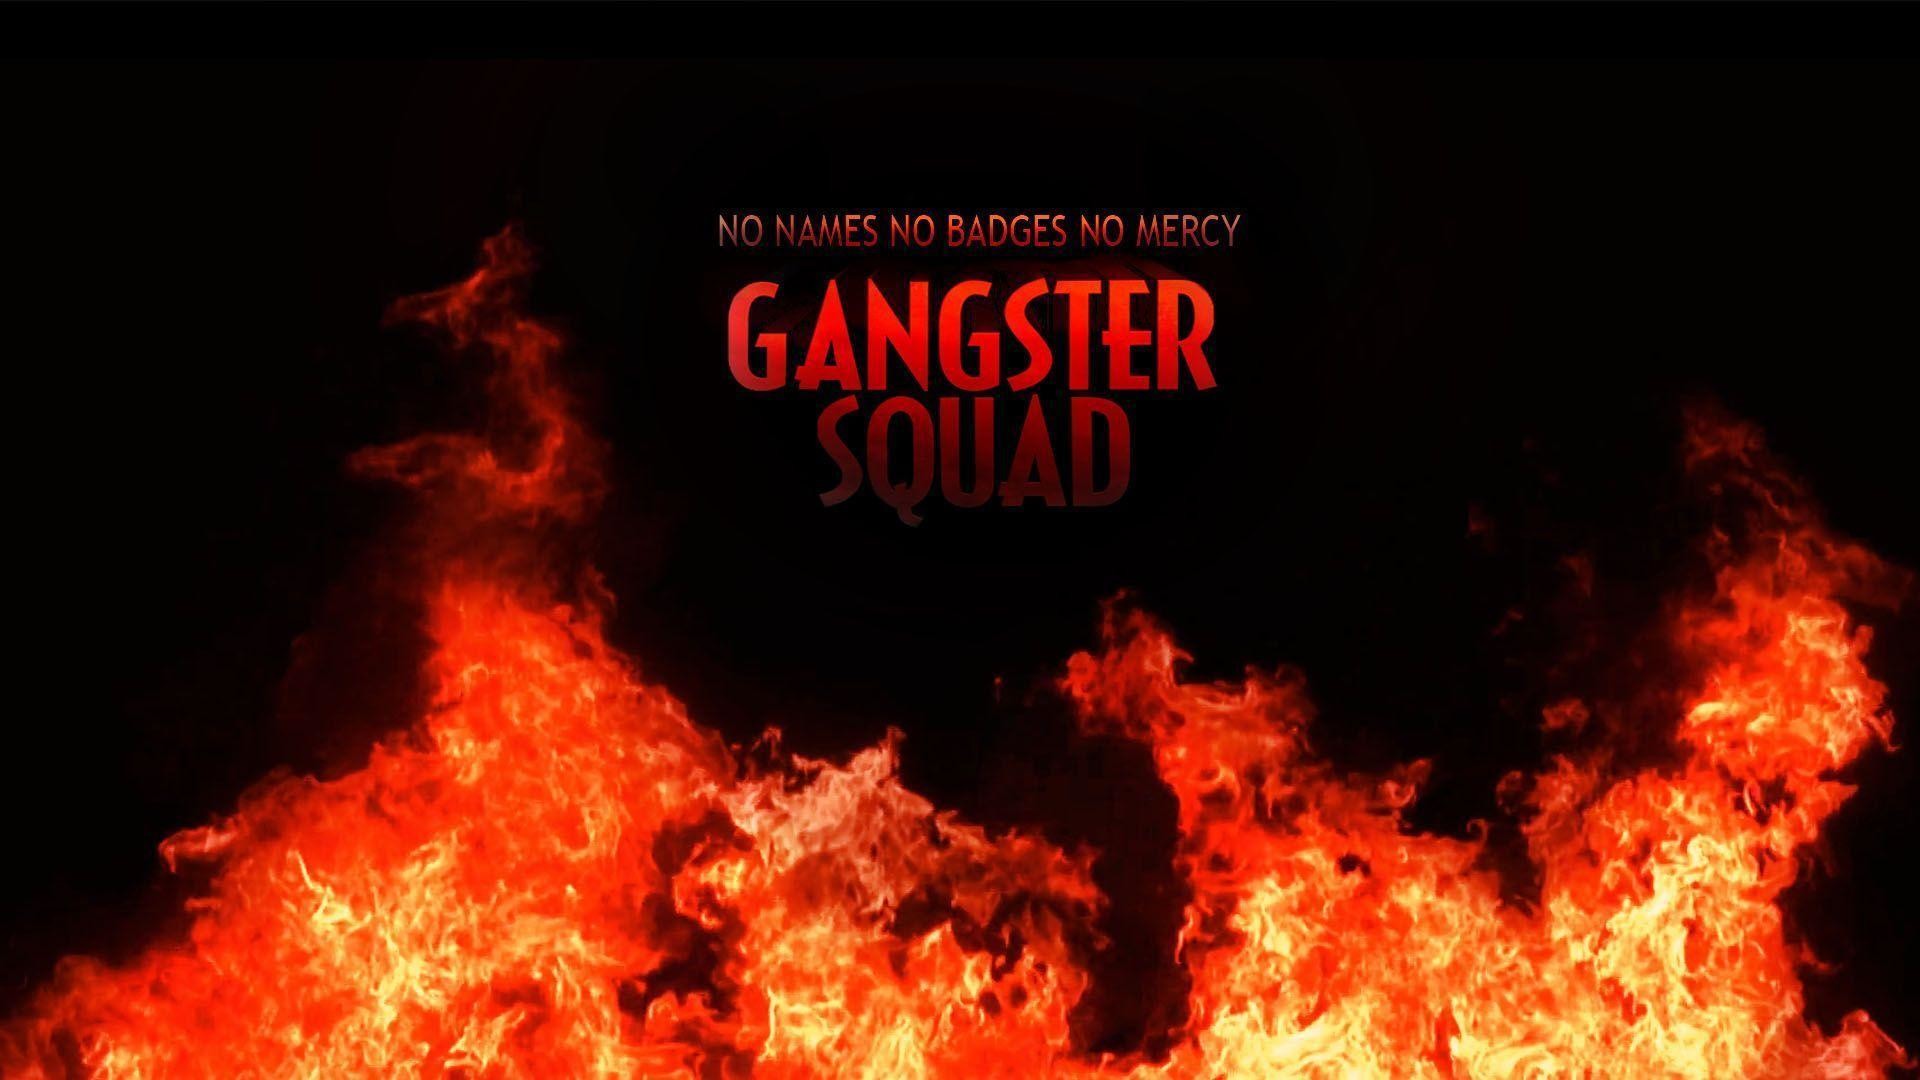 1920x1080 Gangster Squad Wallpaper by PhunLS on DeviantArt